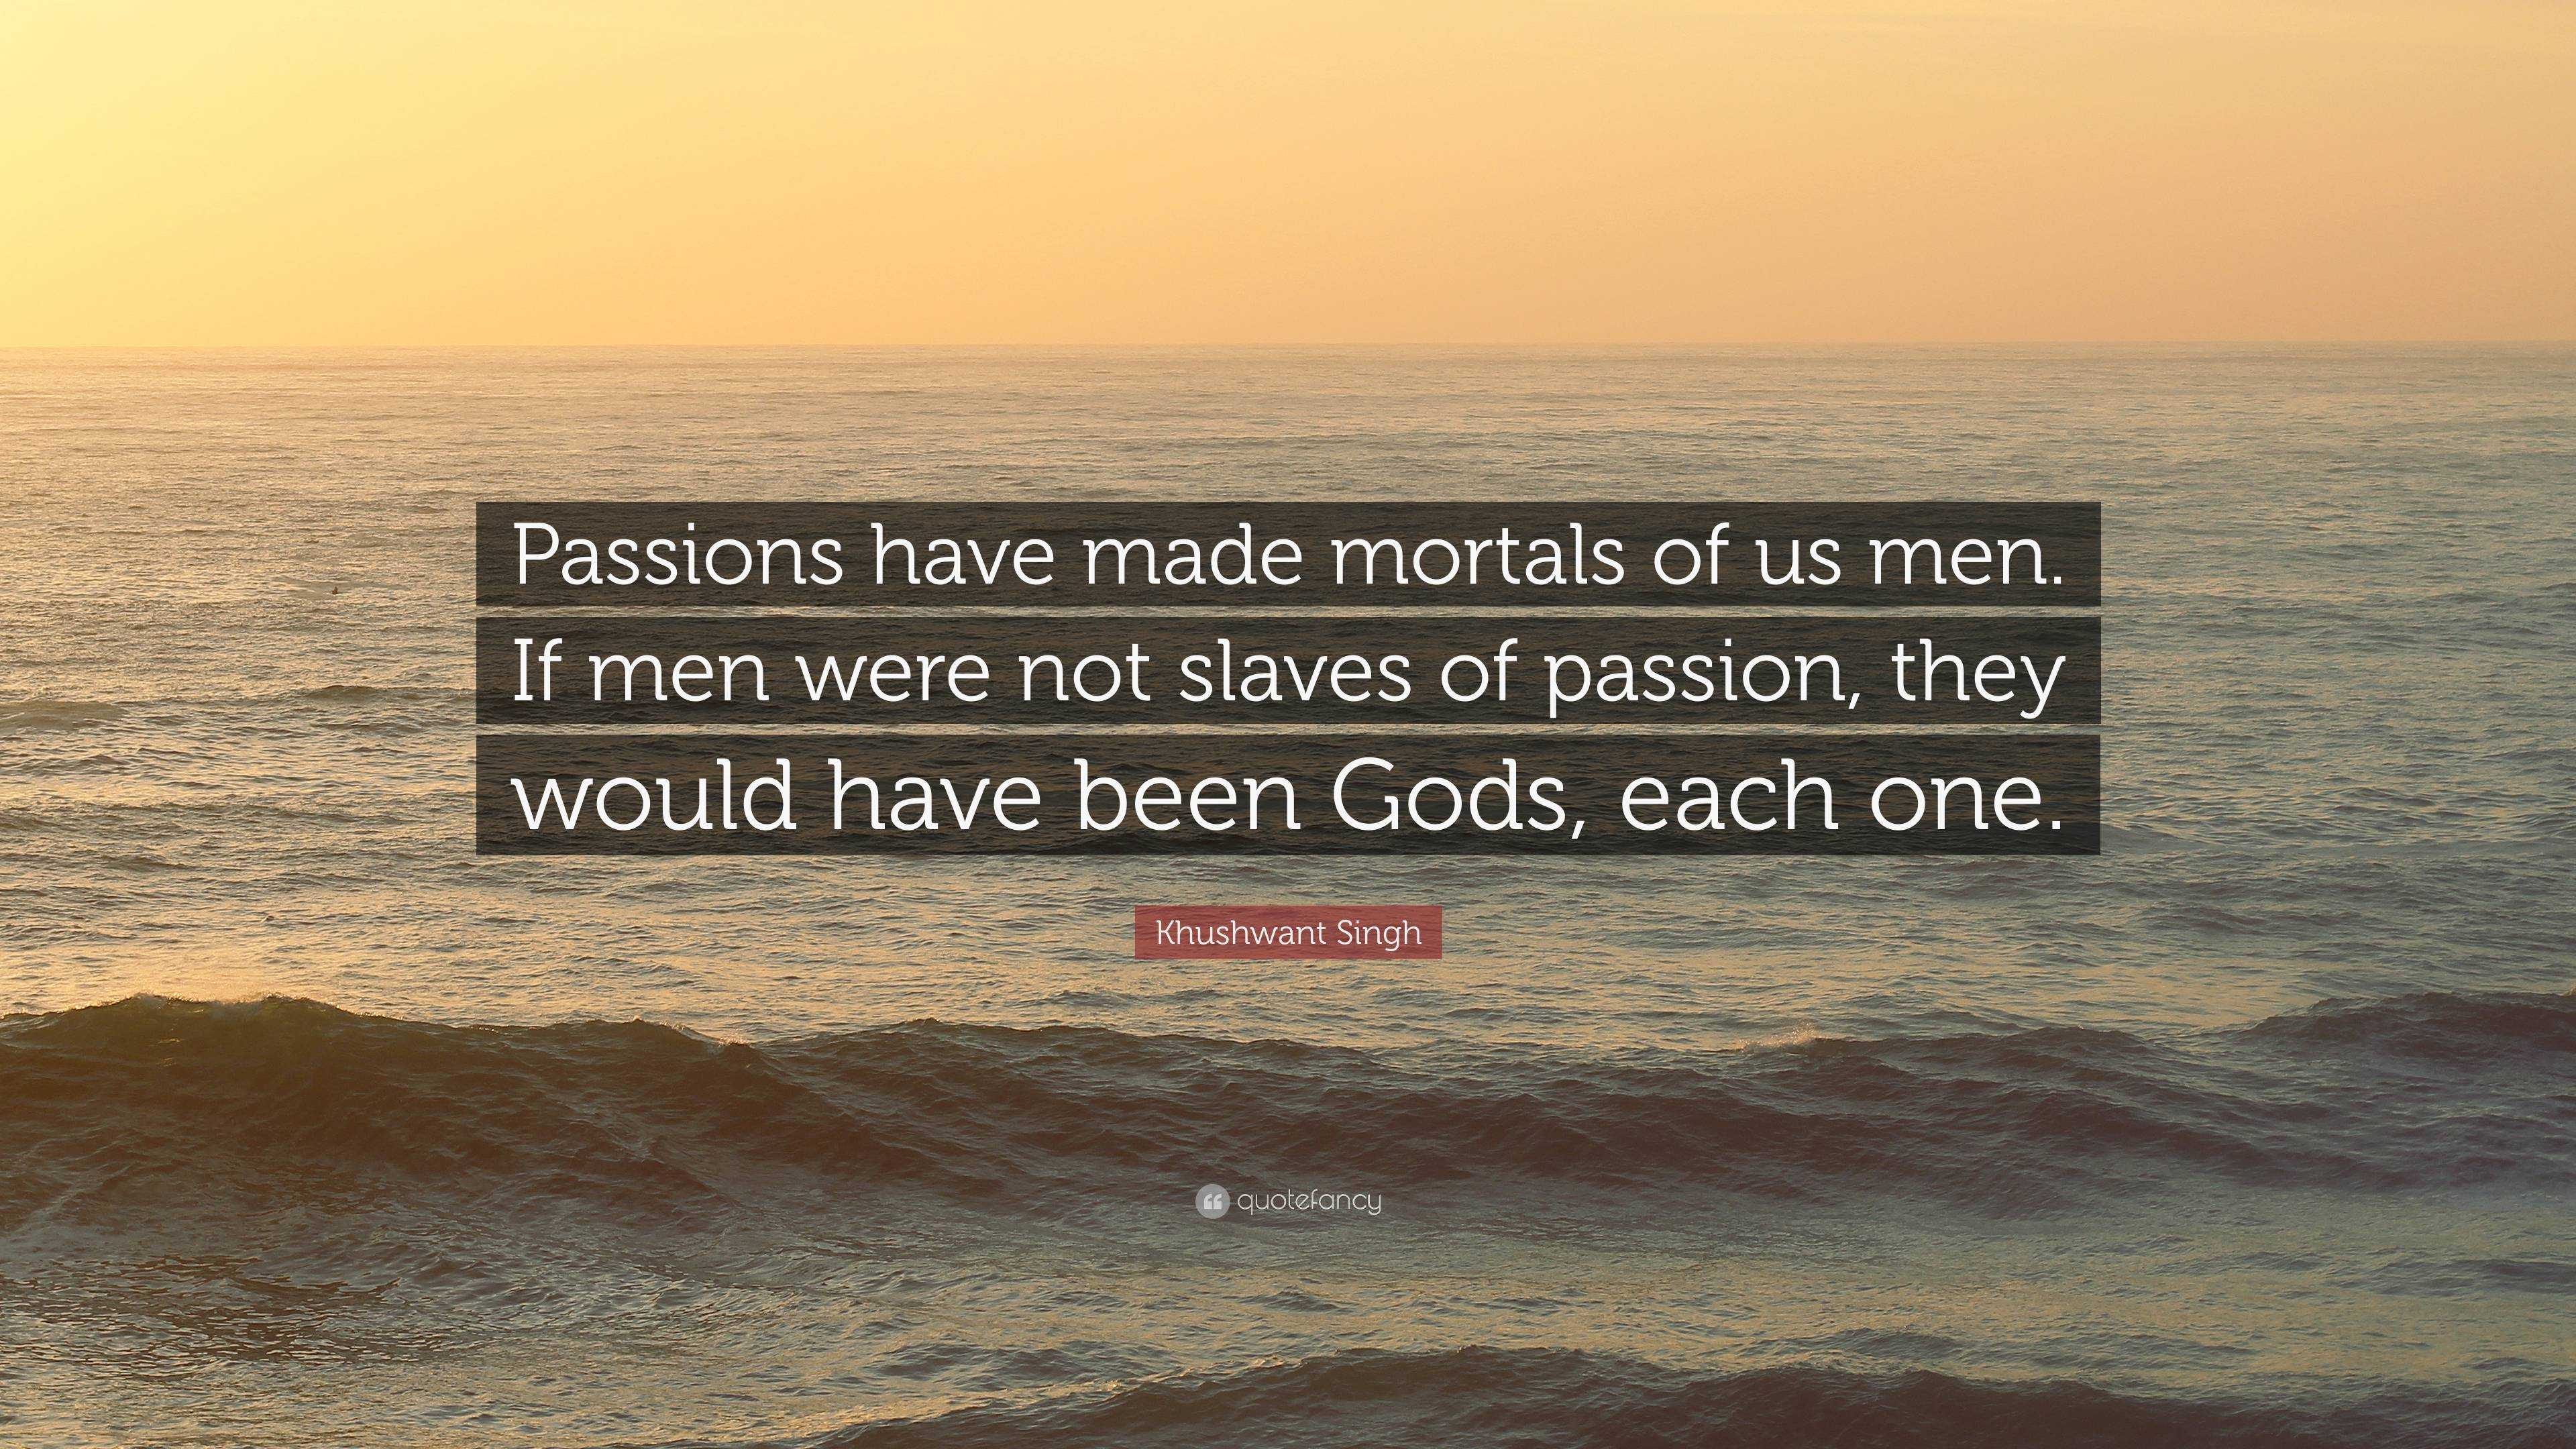 Khushwant Singh Quote “passions Have Made Mortals Of Us Men If Men